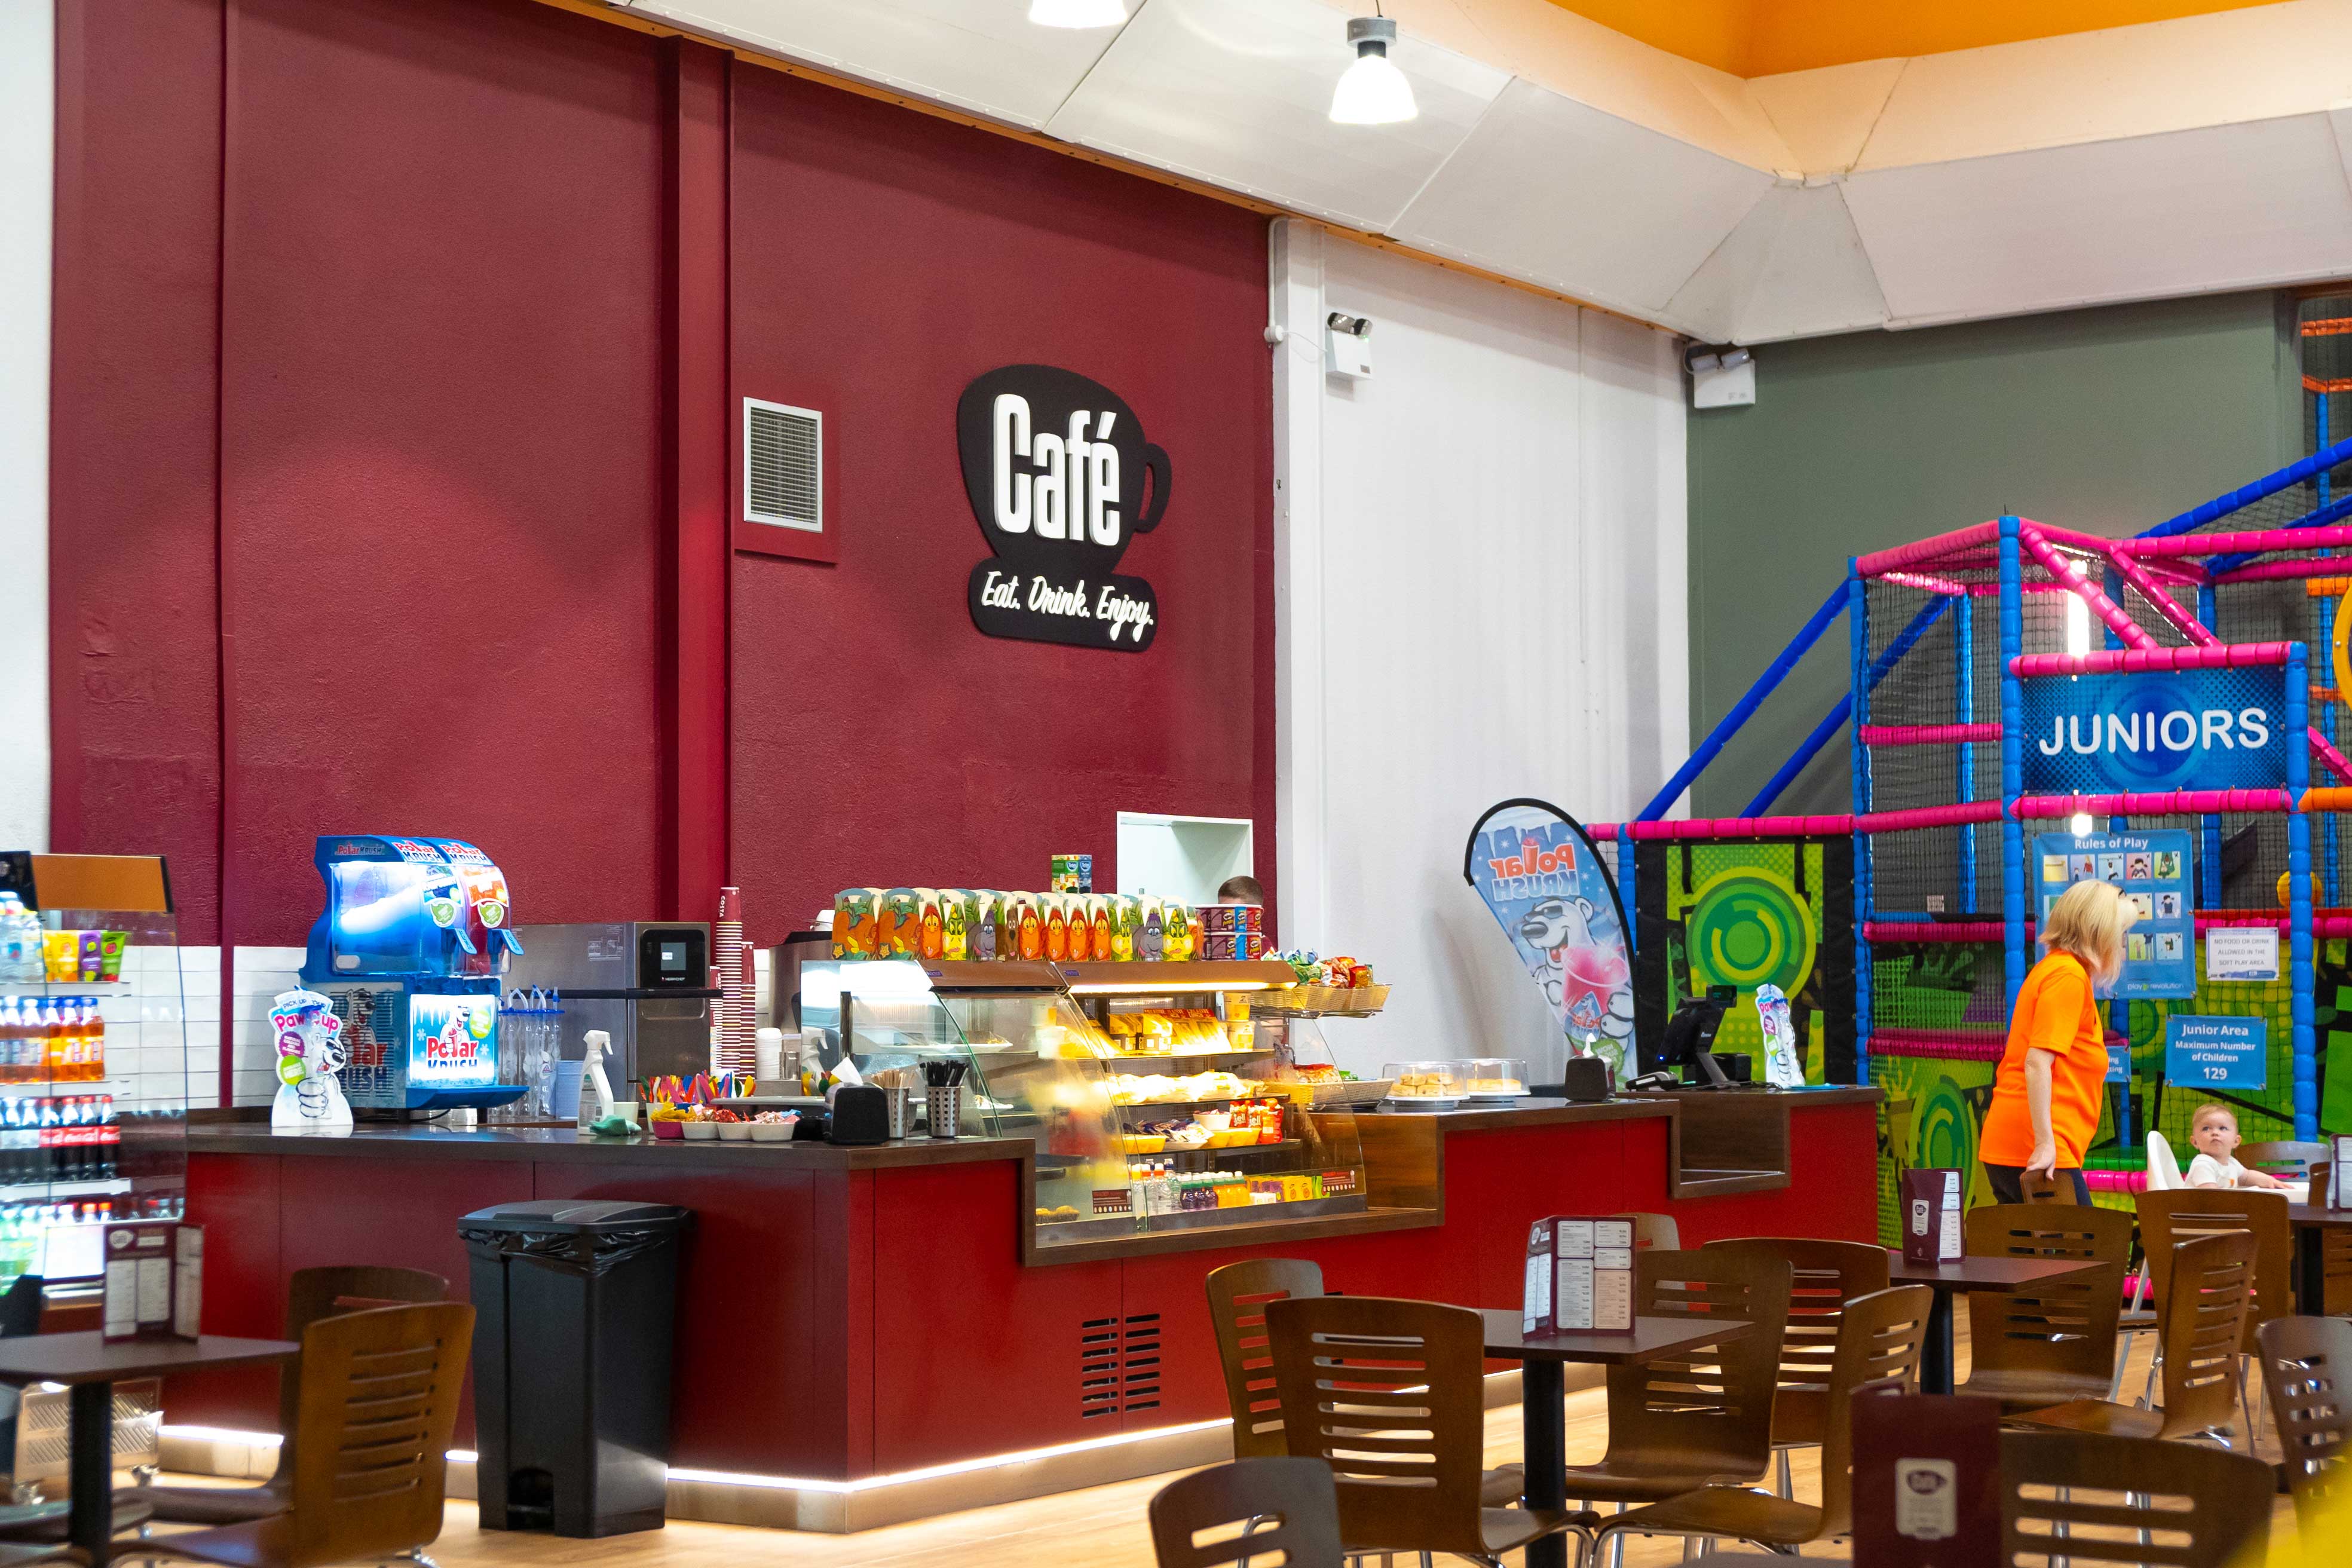 Proud to serve Costa Cafe